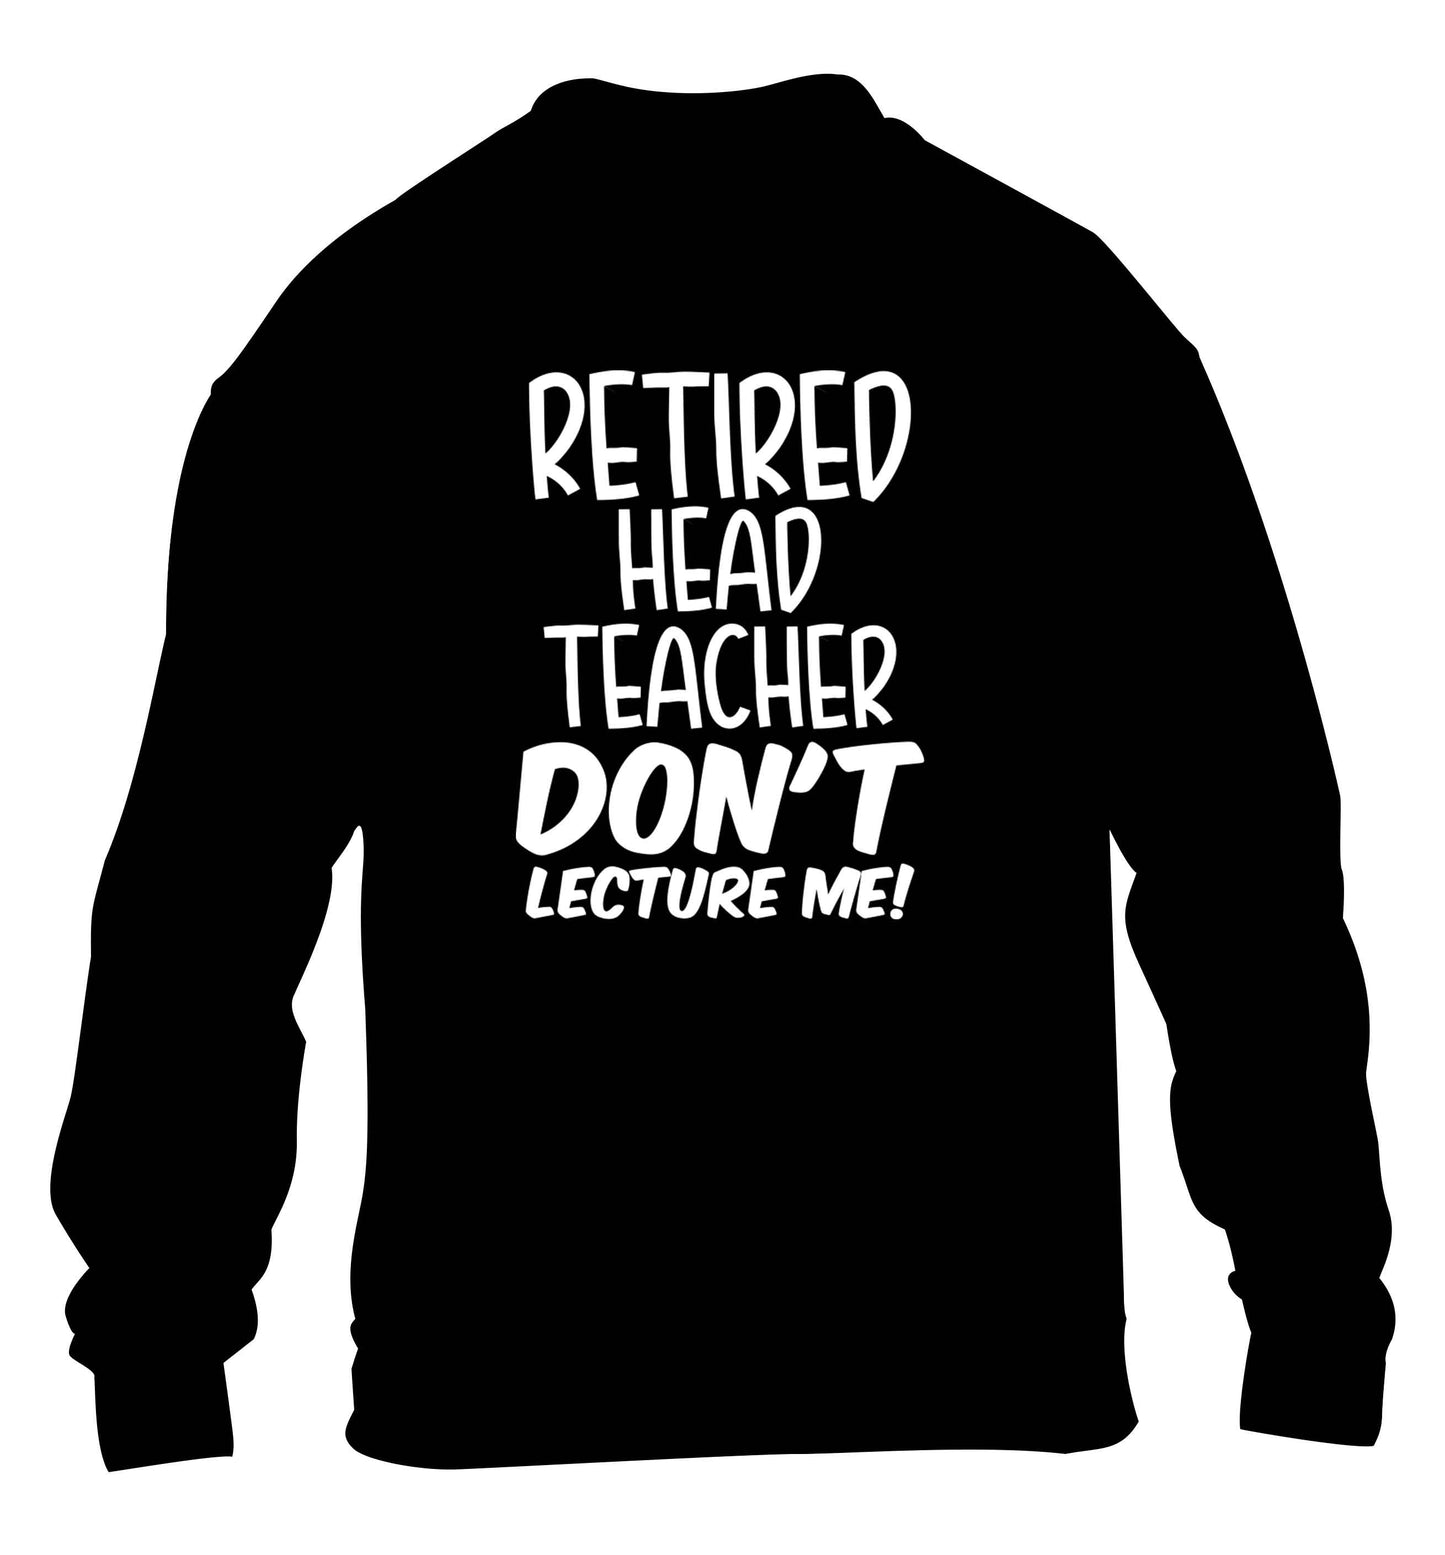 Retired head teacher don't lecture me! children's black sweater 12-13 Years